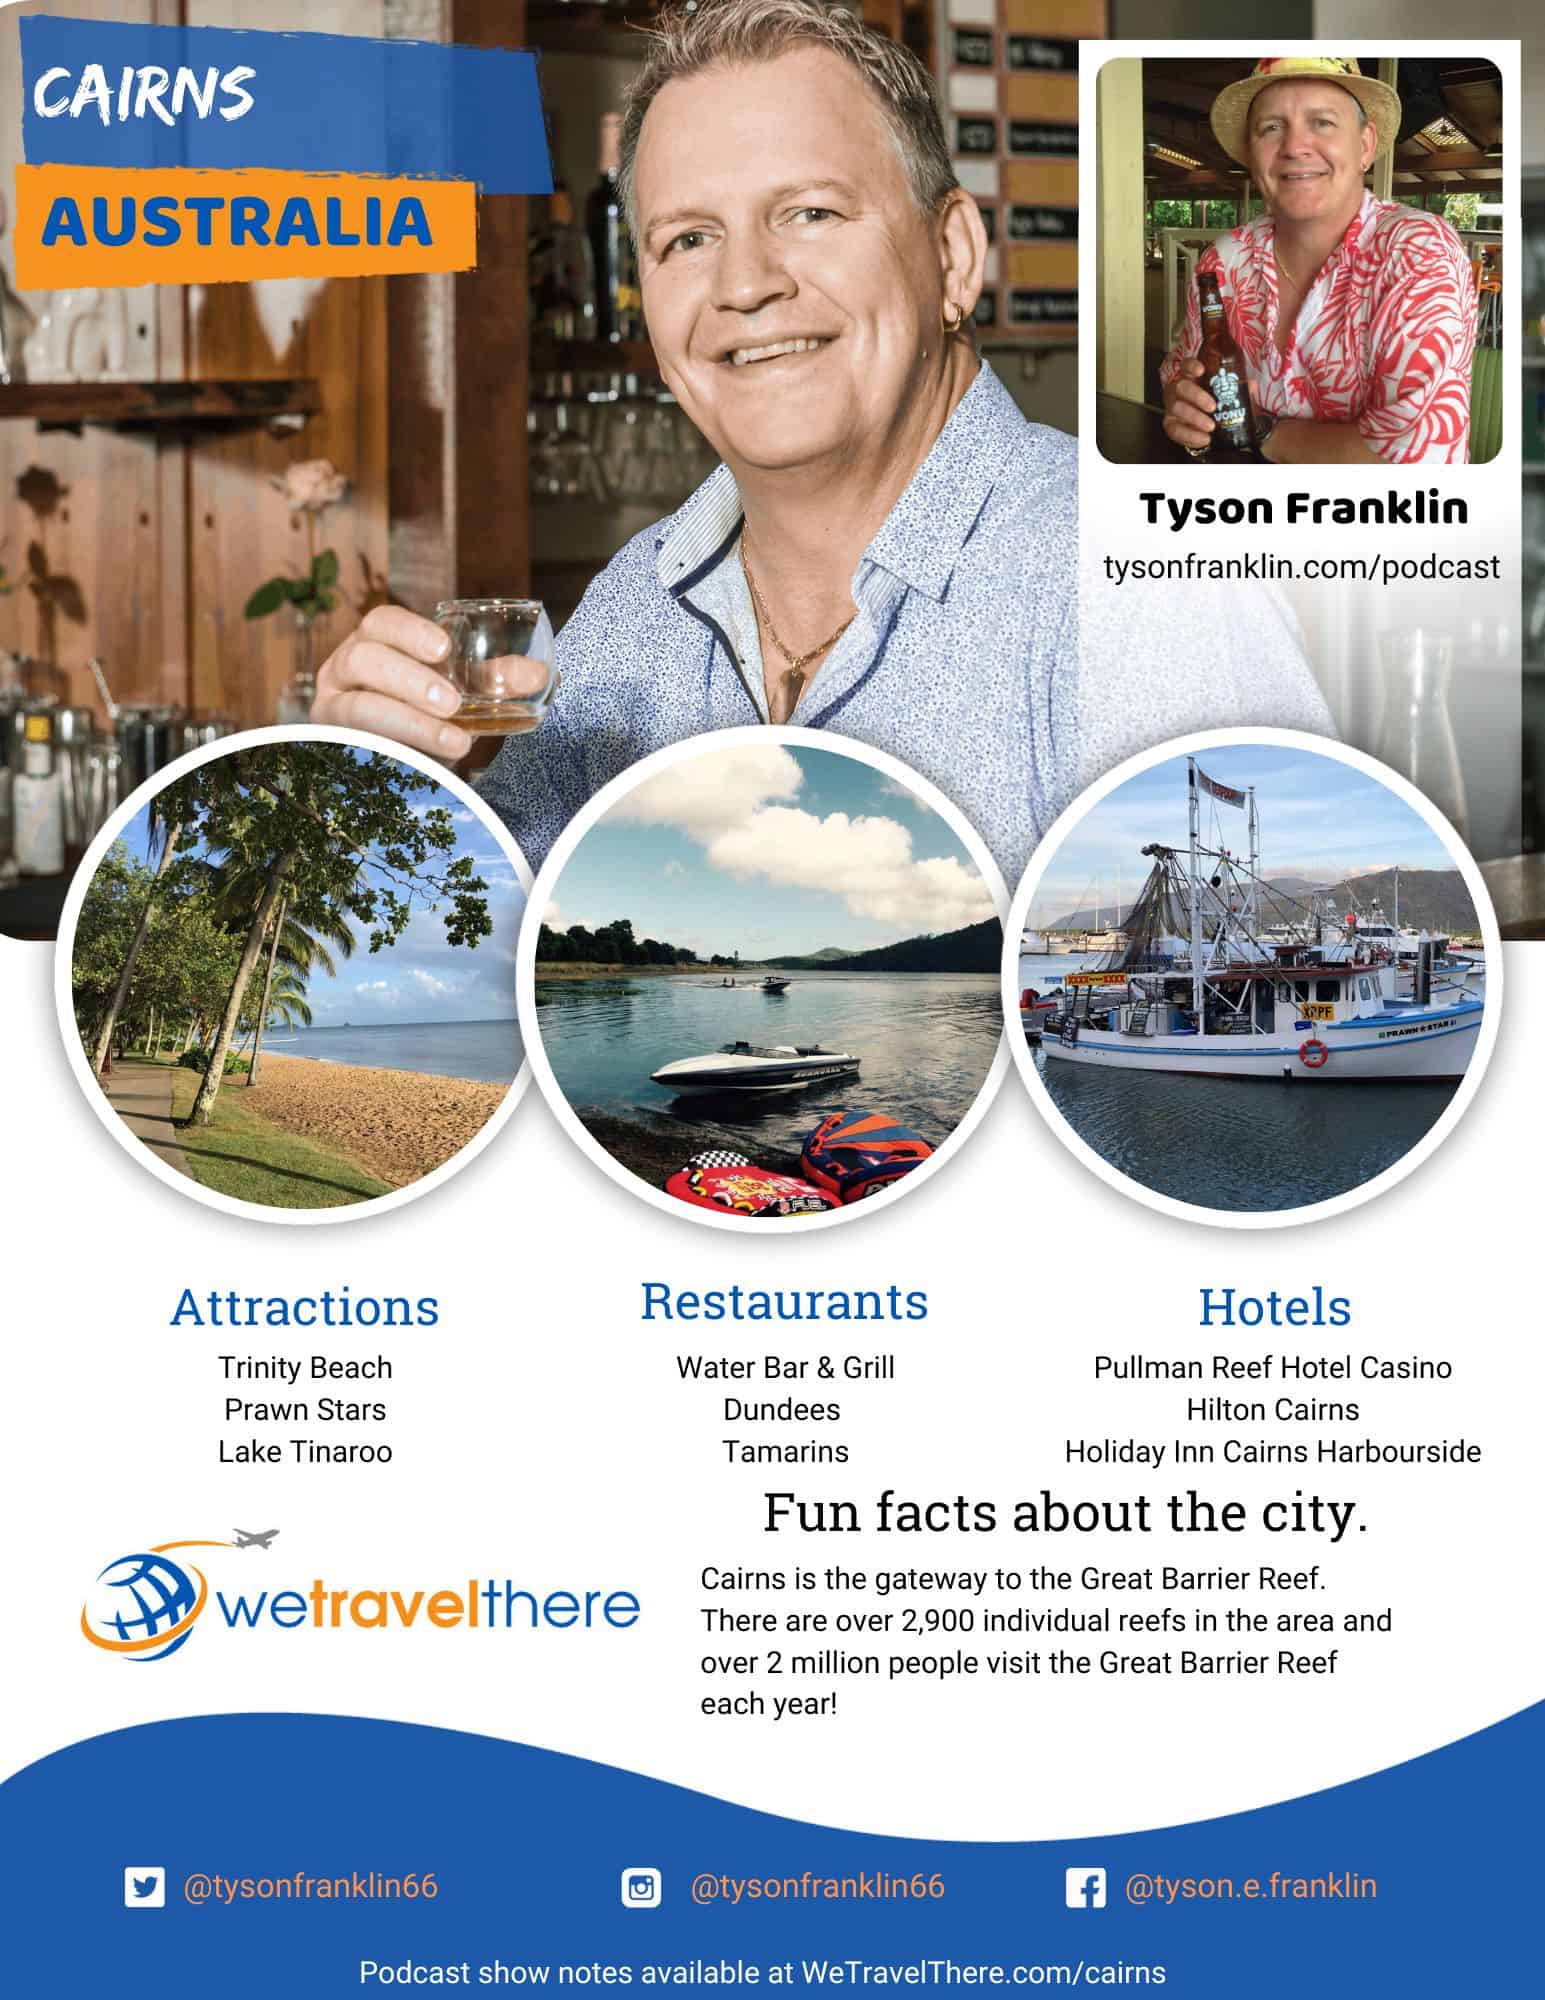 We-Travel-There-Cairns-Australia-Tyson-Franklin-podcast-one-sheet